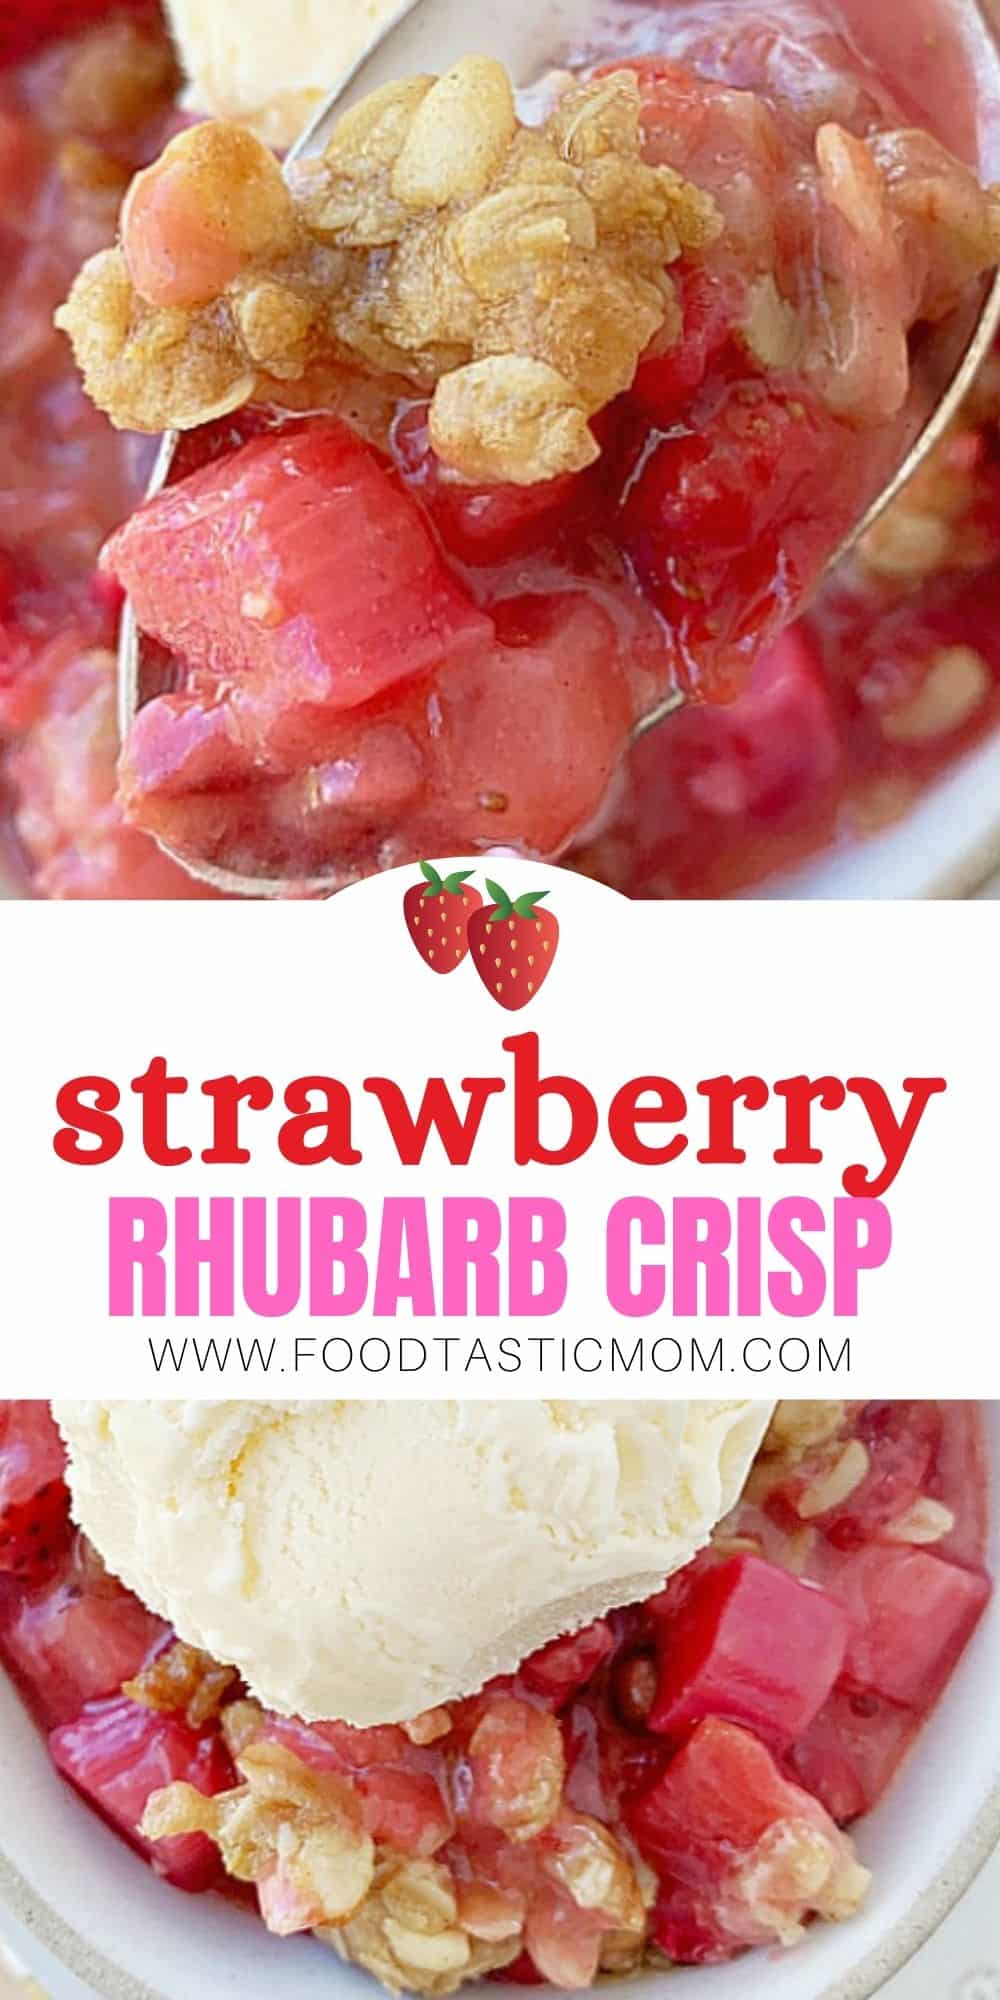 Strawberry Rhubarb Crisp is a delightfully sweet and tart dessert that takes just a few minutes to get into the oven. via @foodtasticmom